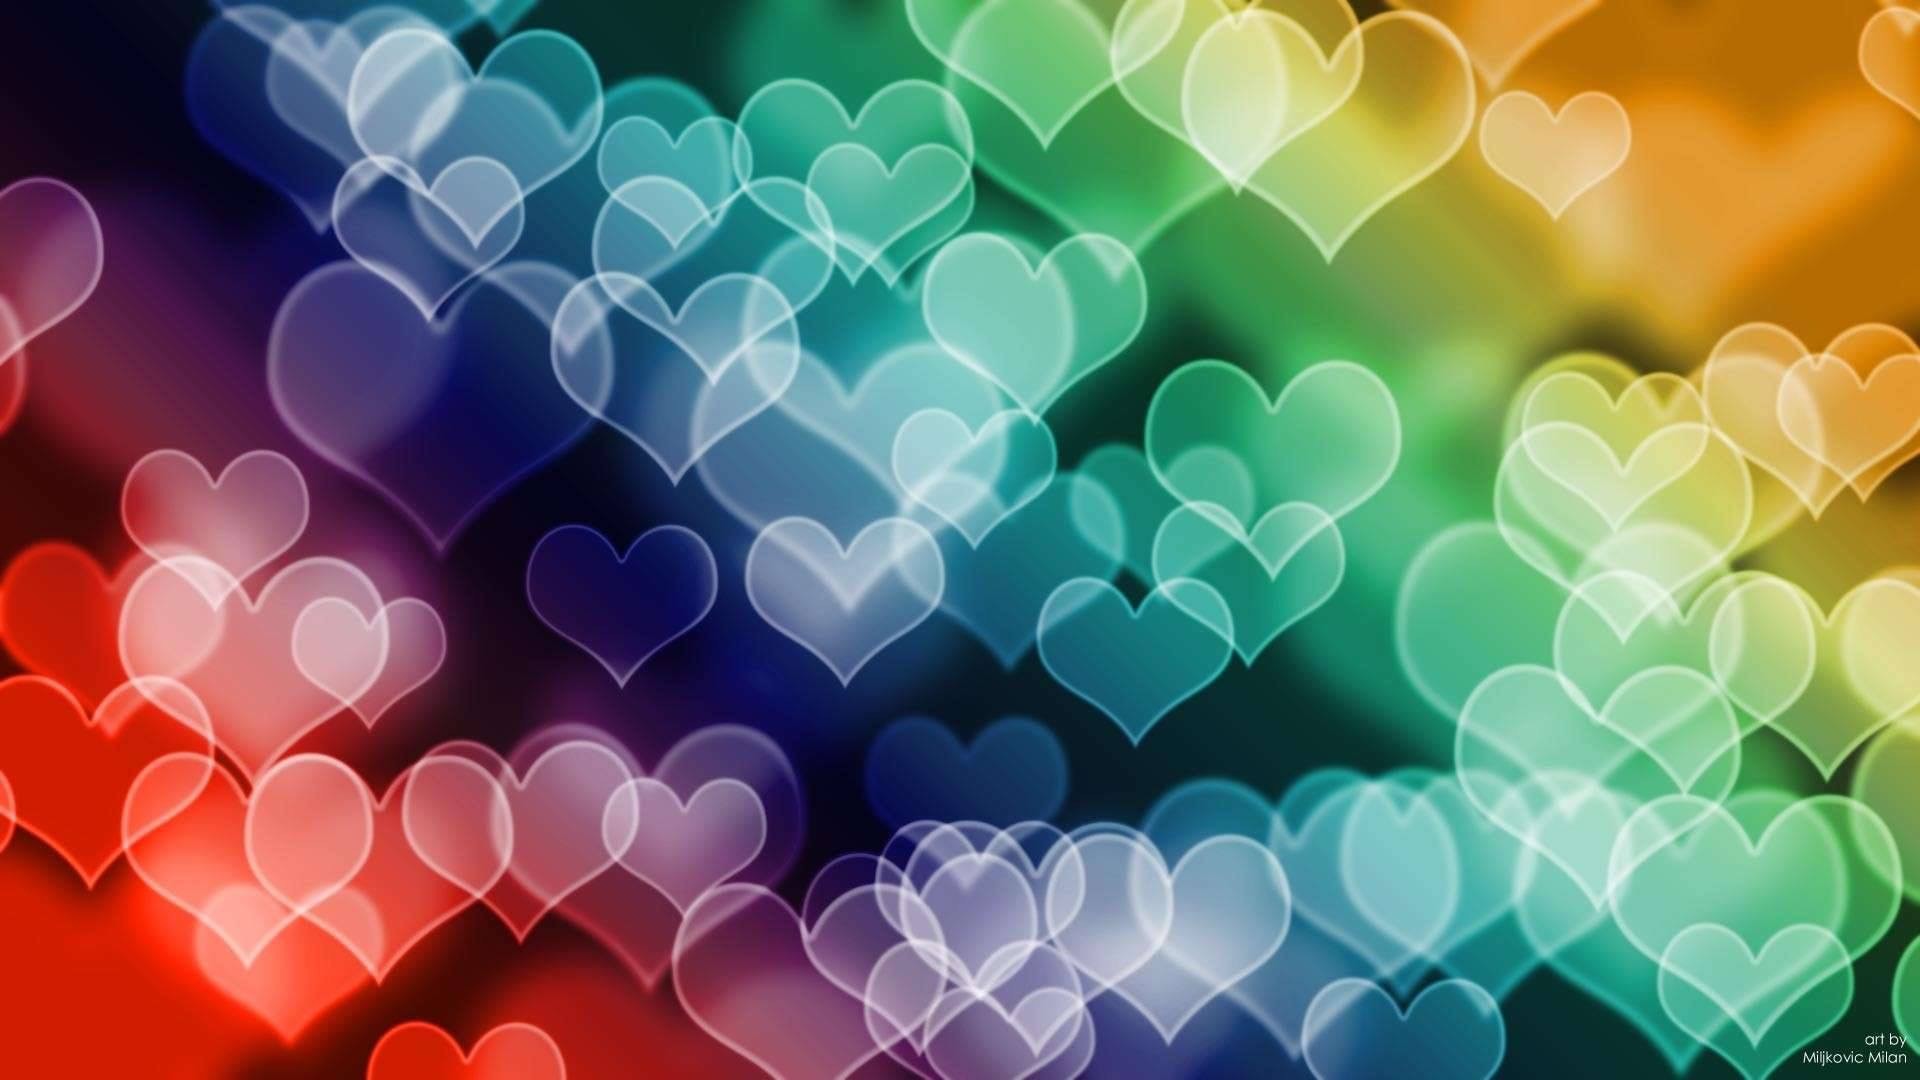 Colored Hearts HD Wallpaper In Full HD From The Valentine Wallpaper HD